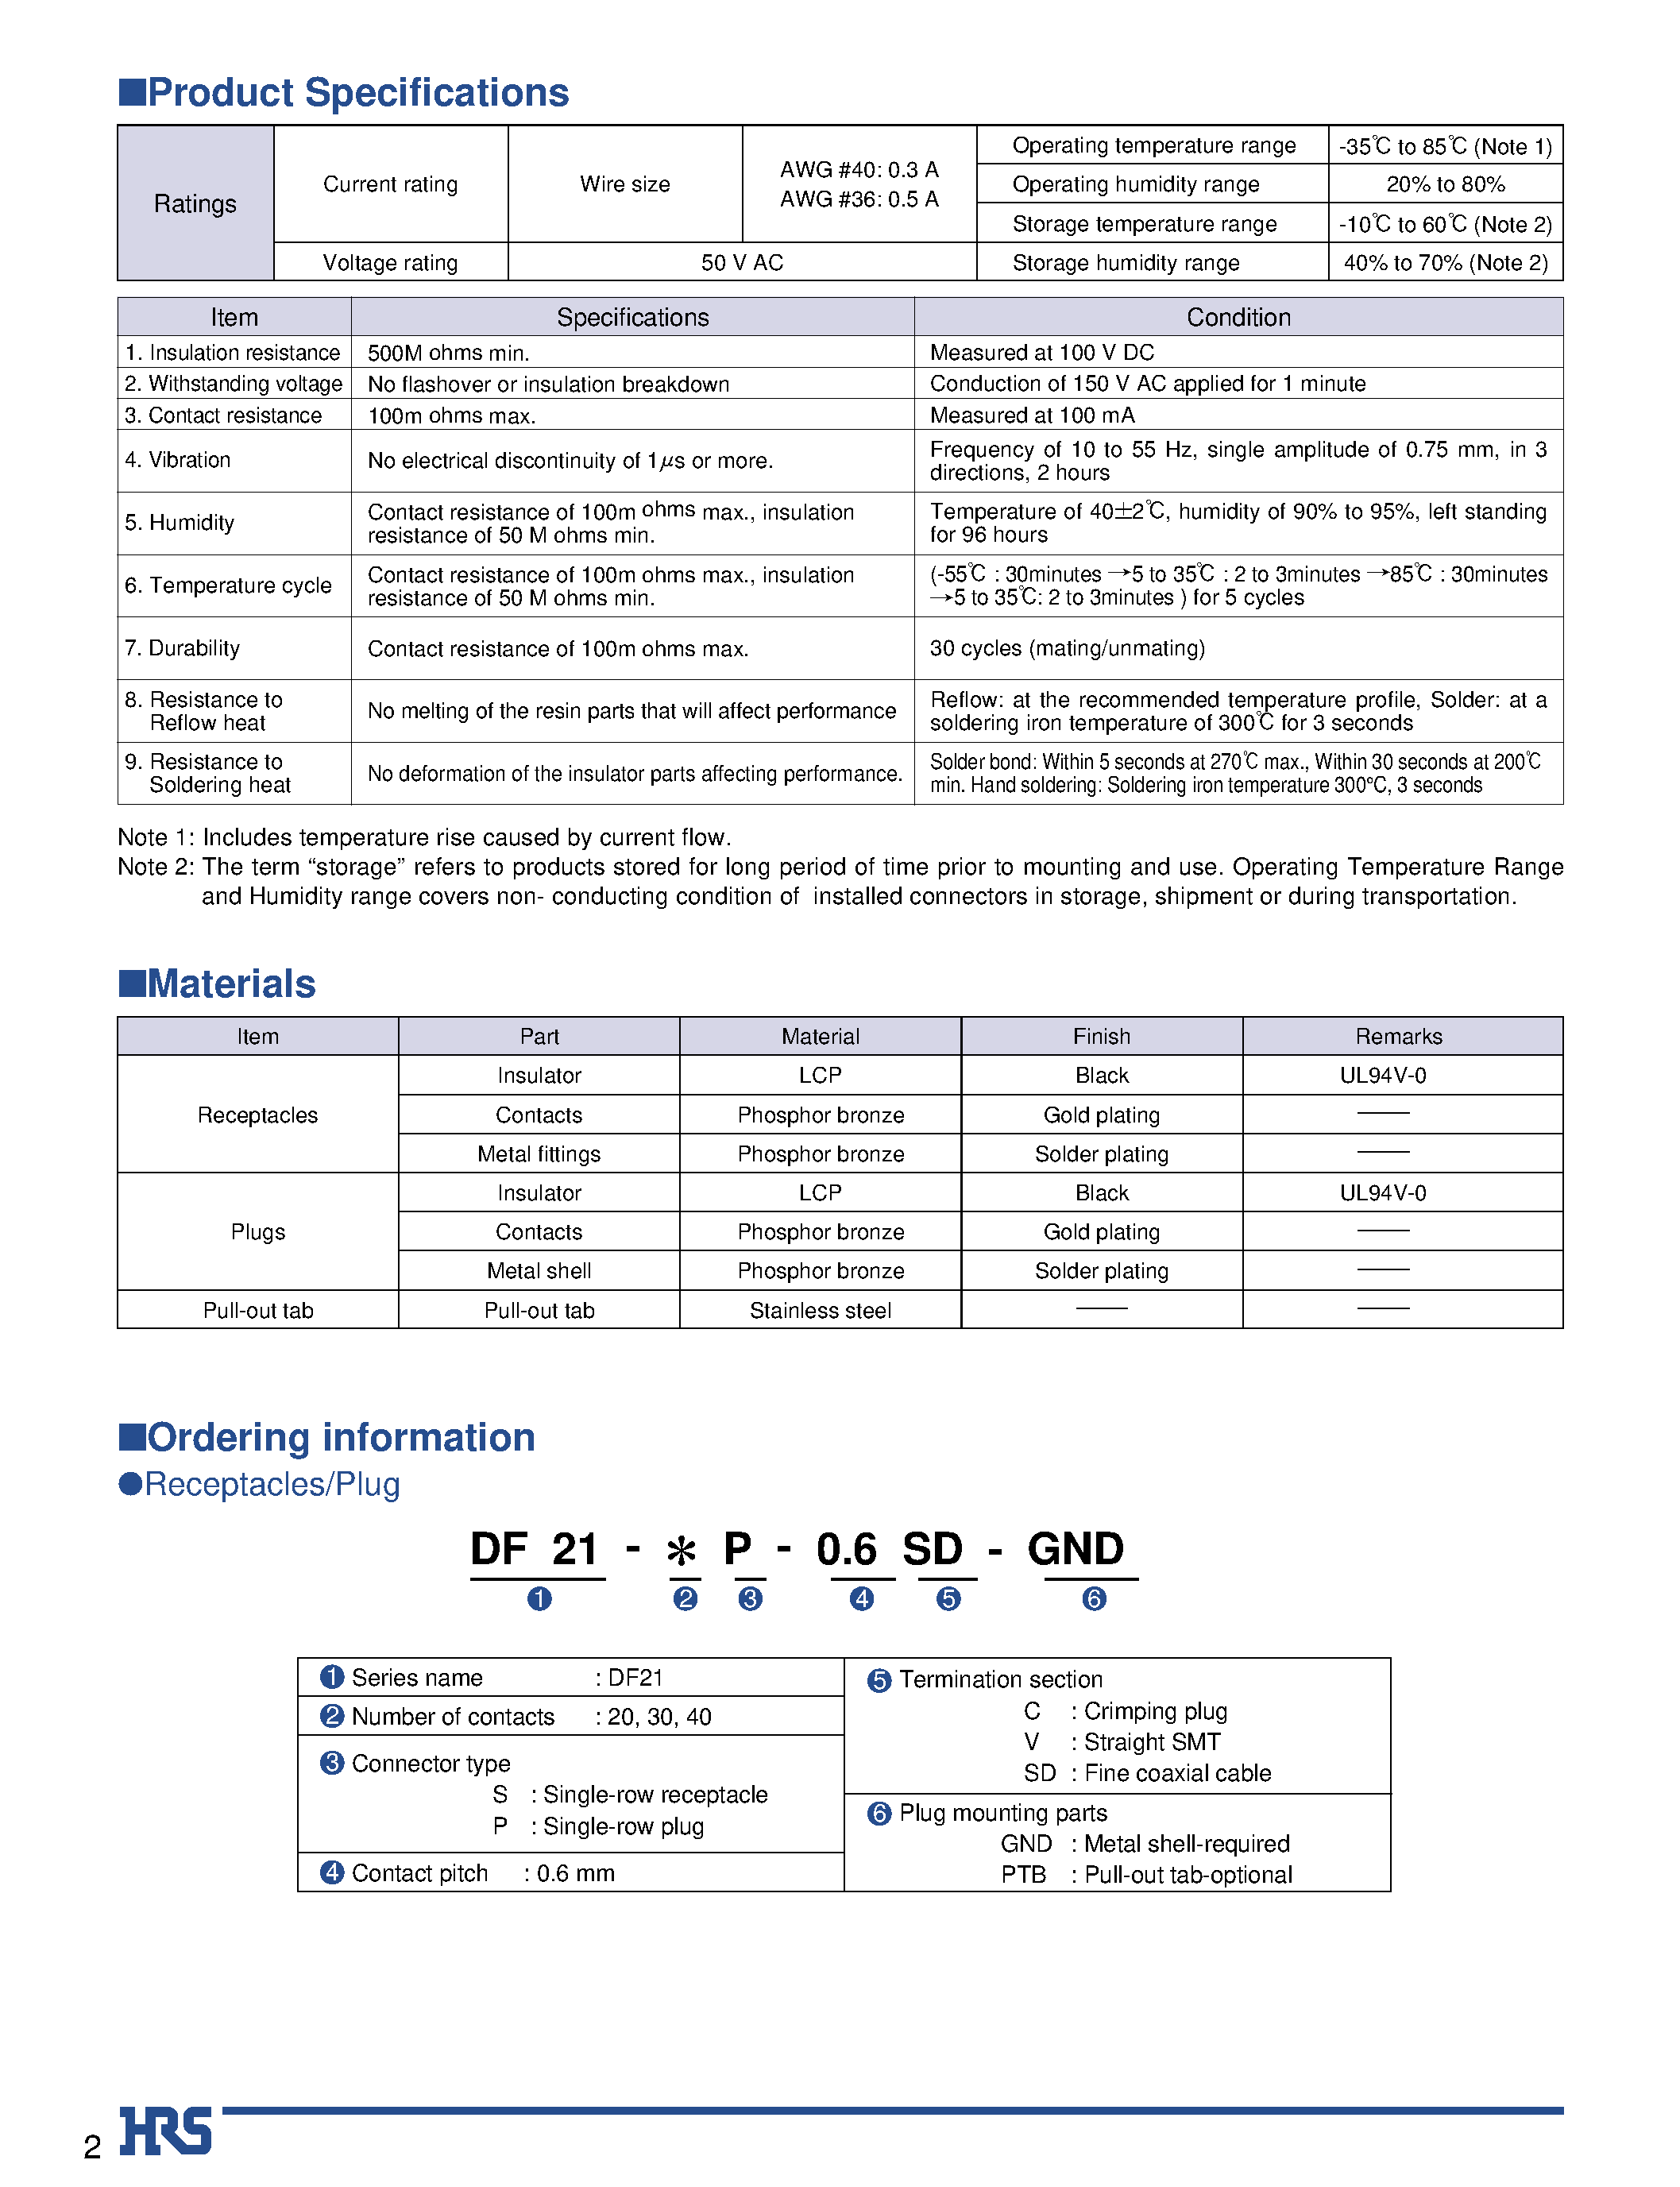 Datasheet DF21-30P-0.6PTB - 0.6mm Pitch Board-to-Fine-Coaxial Cable Connectors page 2